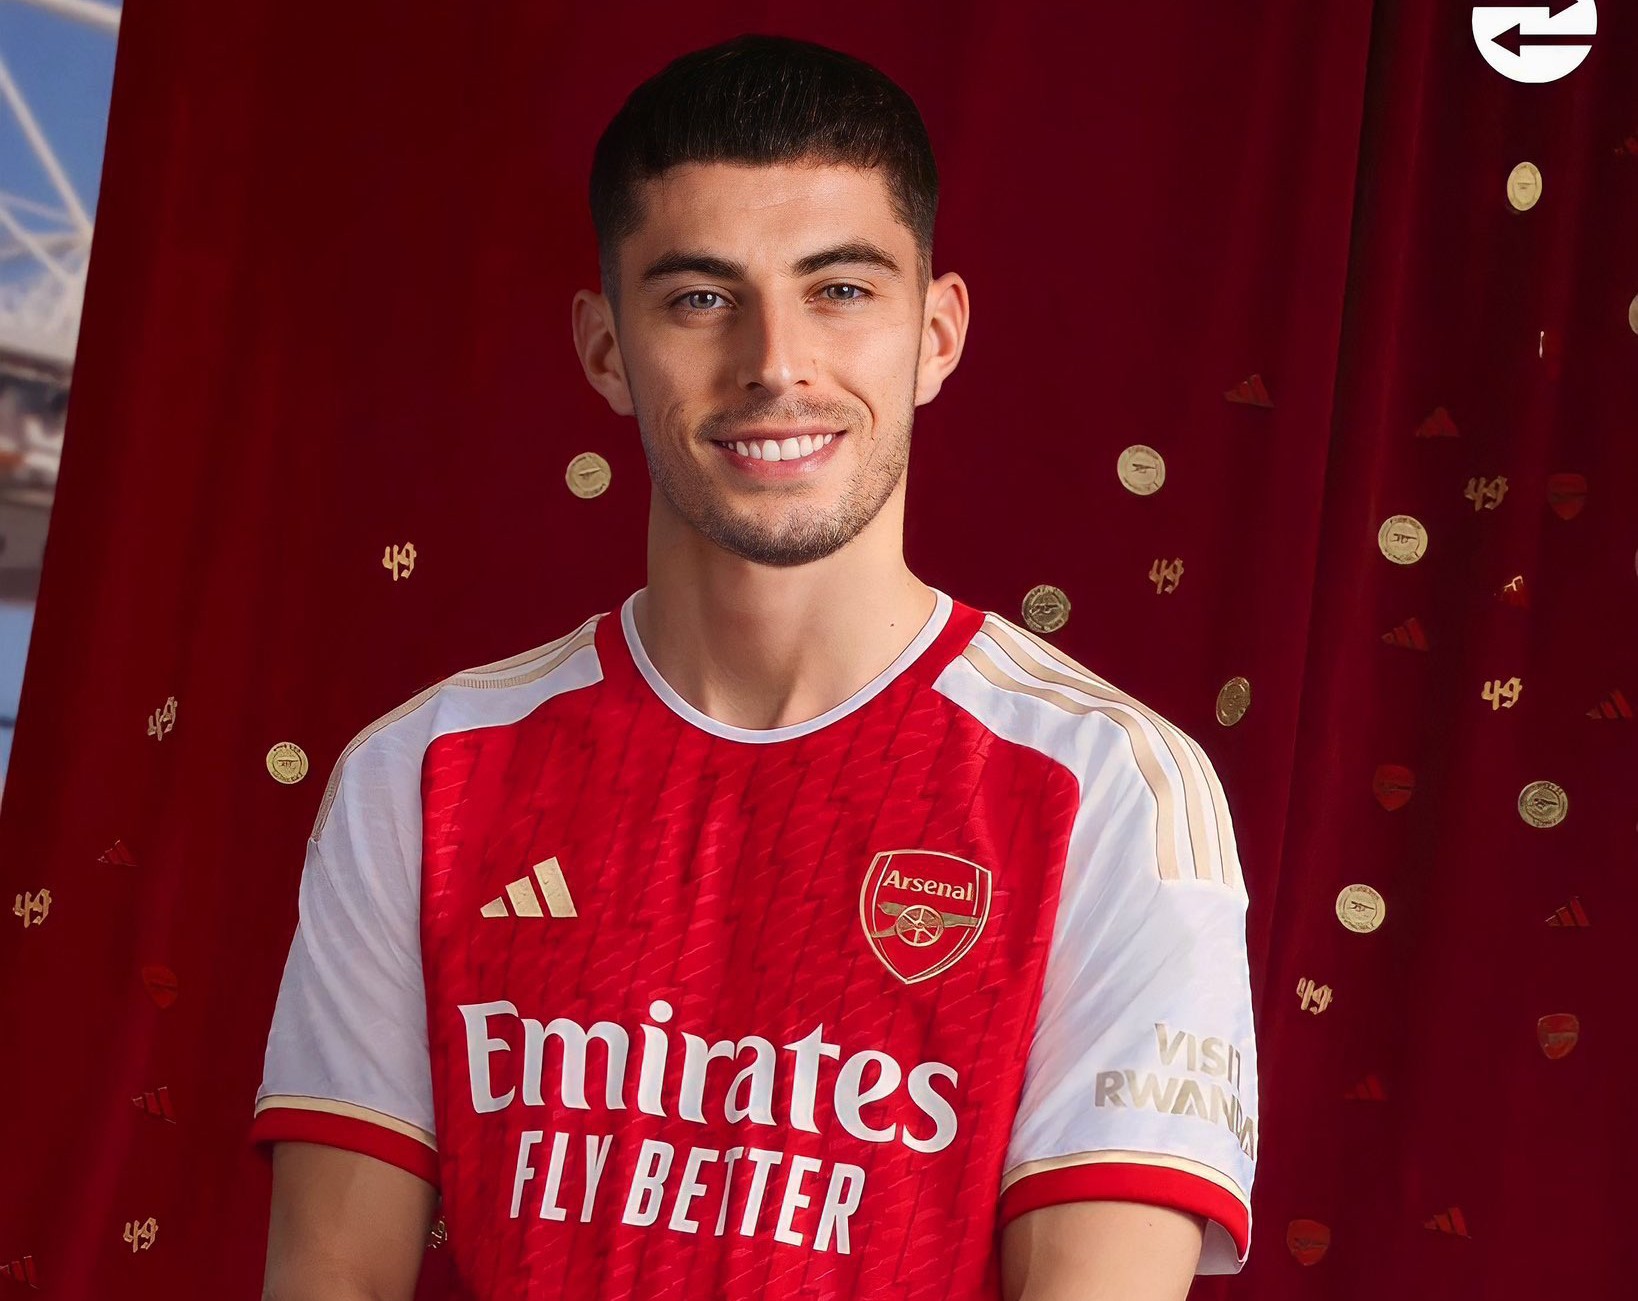 Leaked picture reveals shirt no. Kai Havertz will wear at Arsenal ...